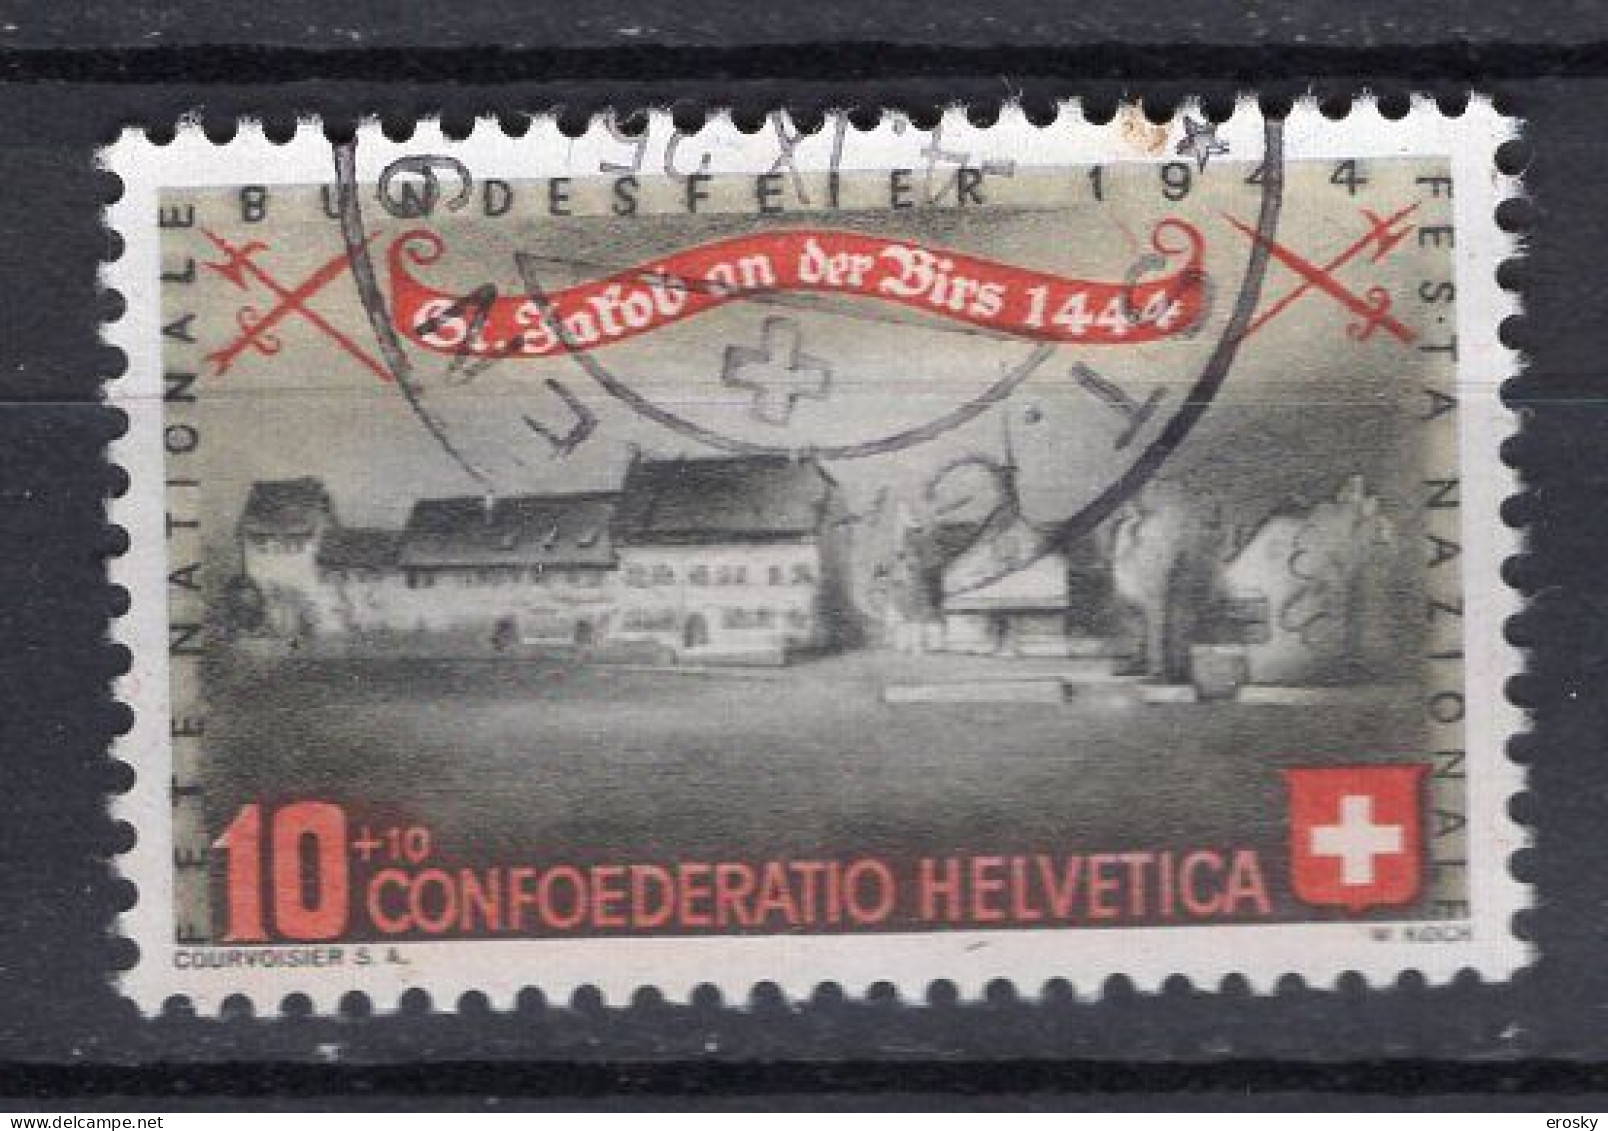 T3108 - SUISSE SWITZERLAND Yv N°396 Pro Patria Fete Nationale - Used Stamps